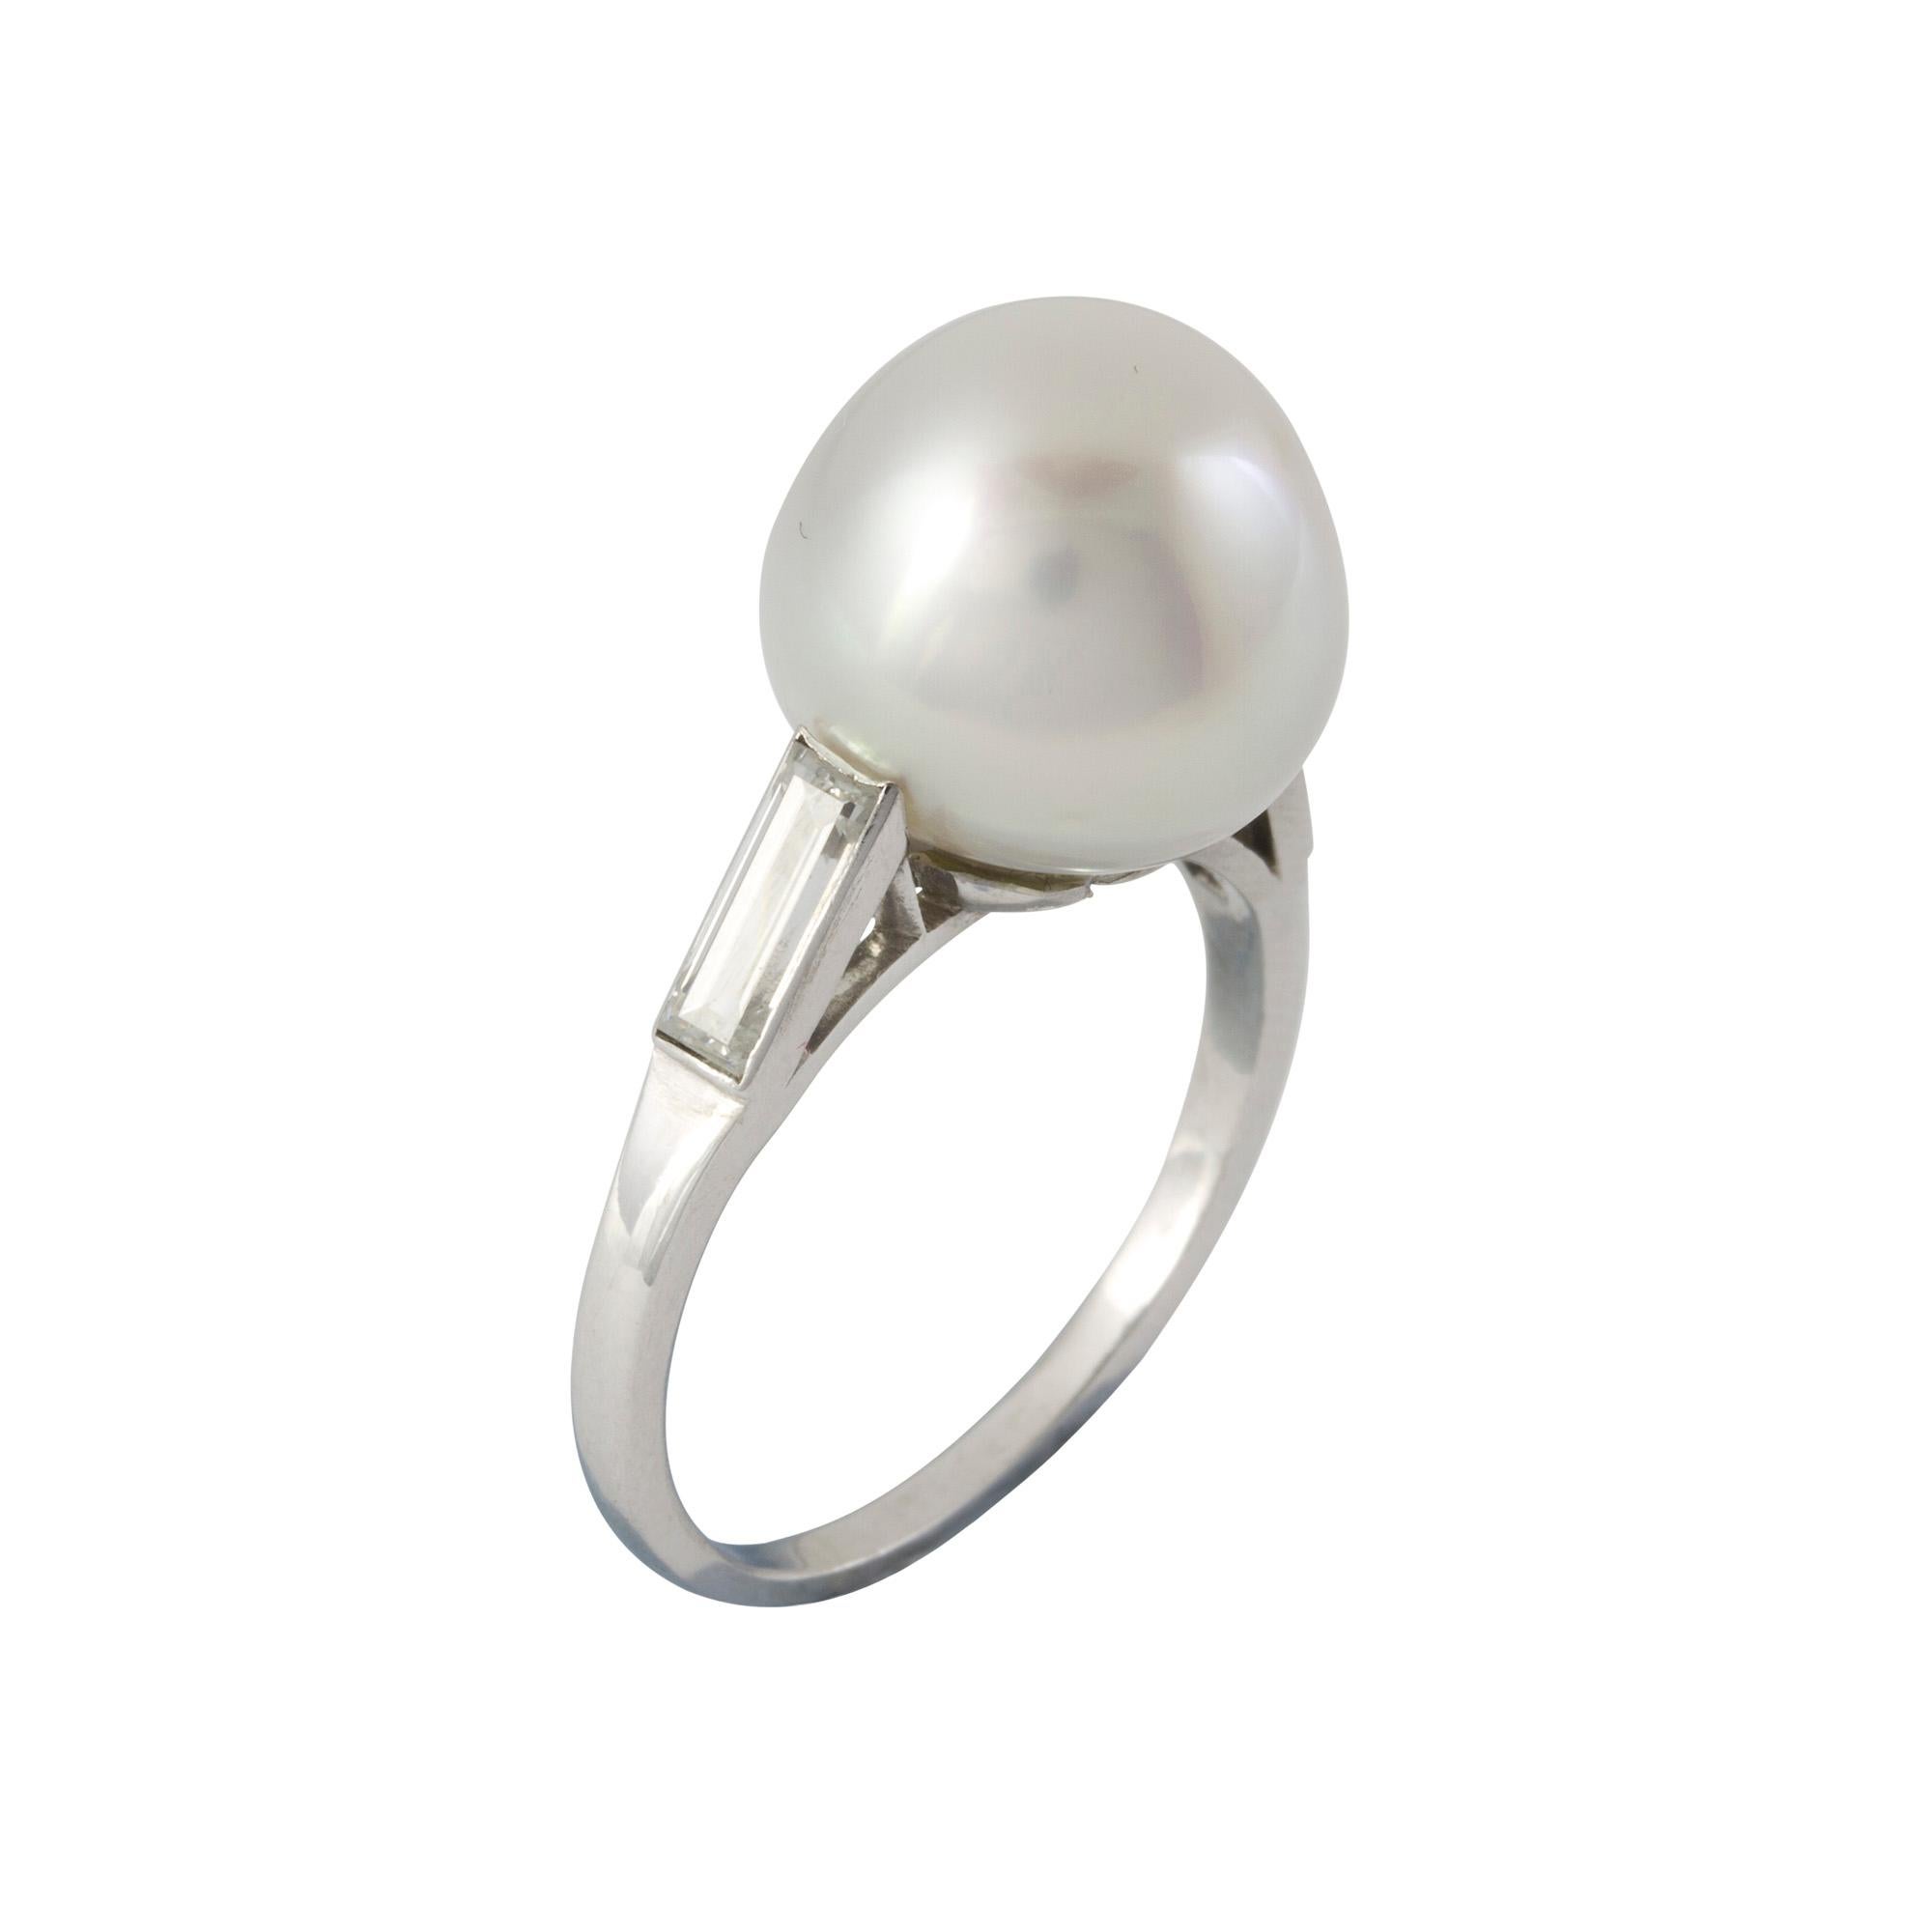 A cultured pearl and diamond ring, the cultured pearl measuring approximately 11.9x11.5 mm in diameter, set to a platinum mount with baguette-cut diamond shoulders, estimated to weigh  a total of 0.7 carats, hallmarked 900 Platinum London, head size